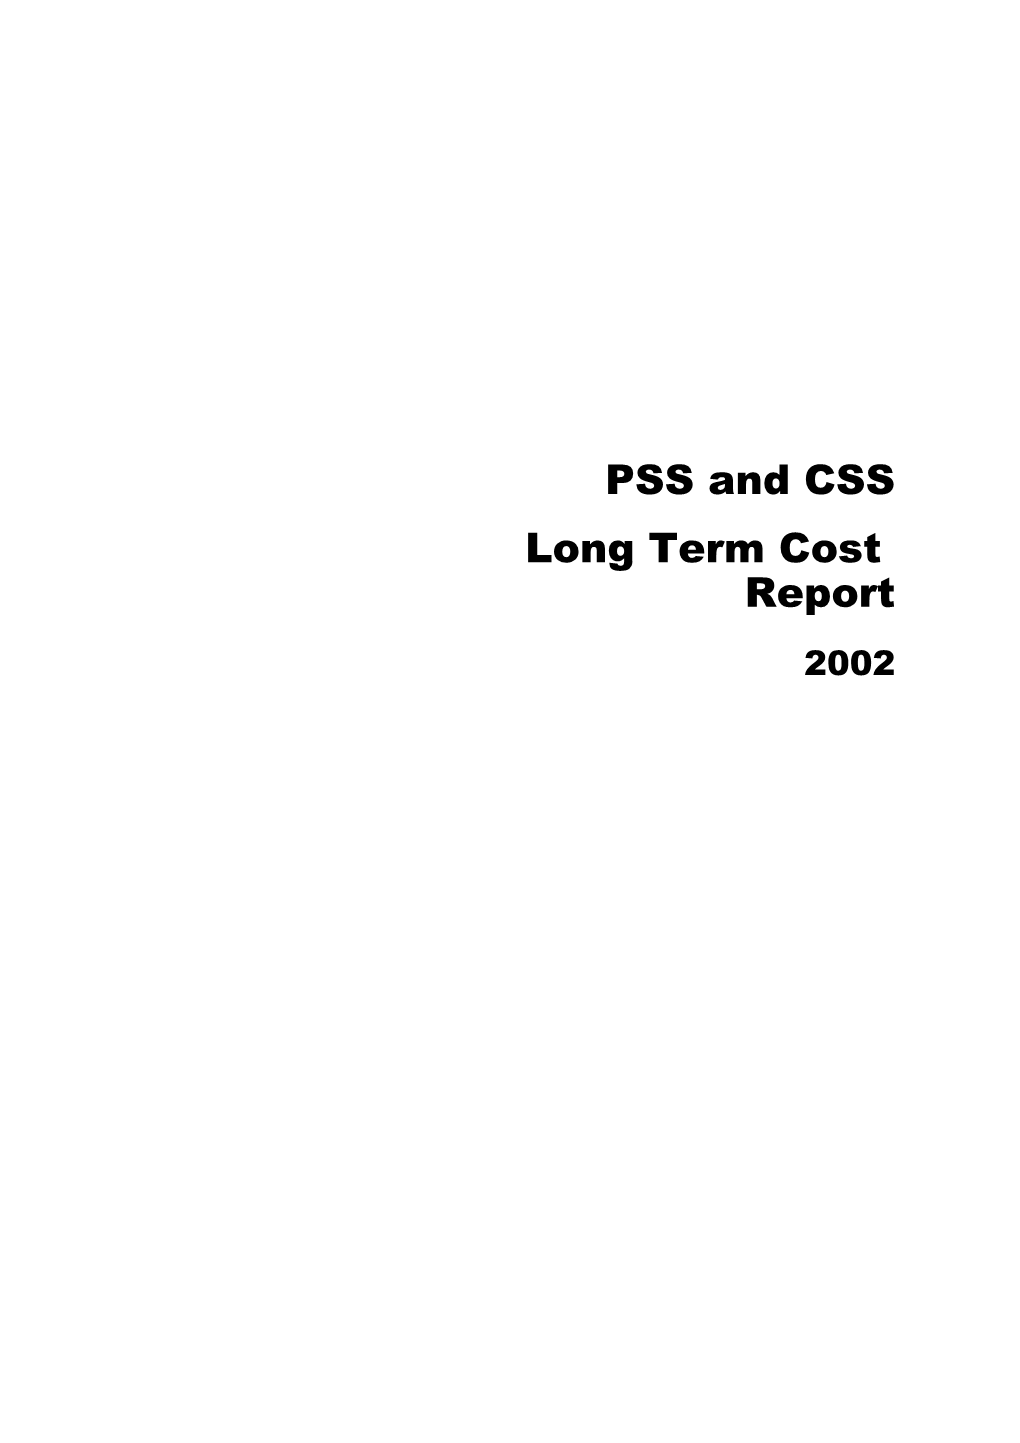 PSS and CSS Long Term Cost Report 2002